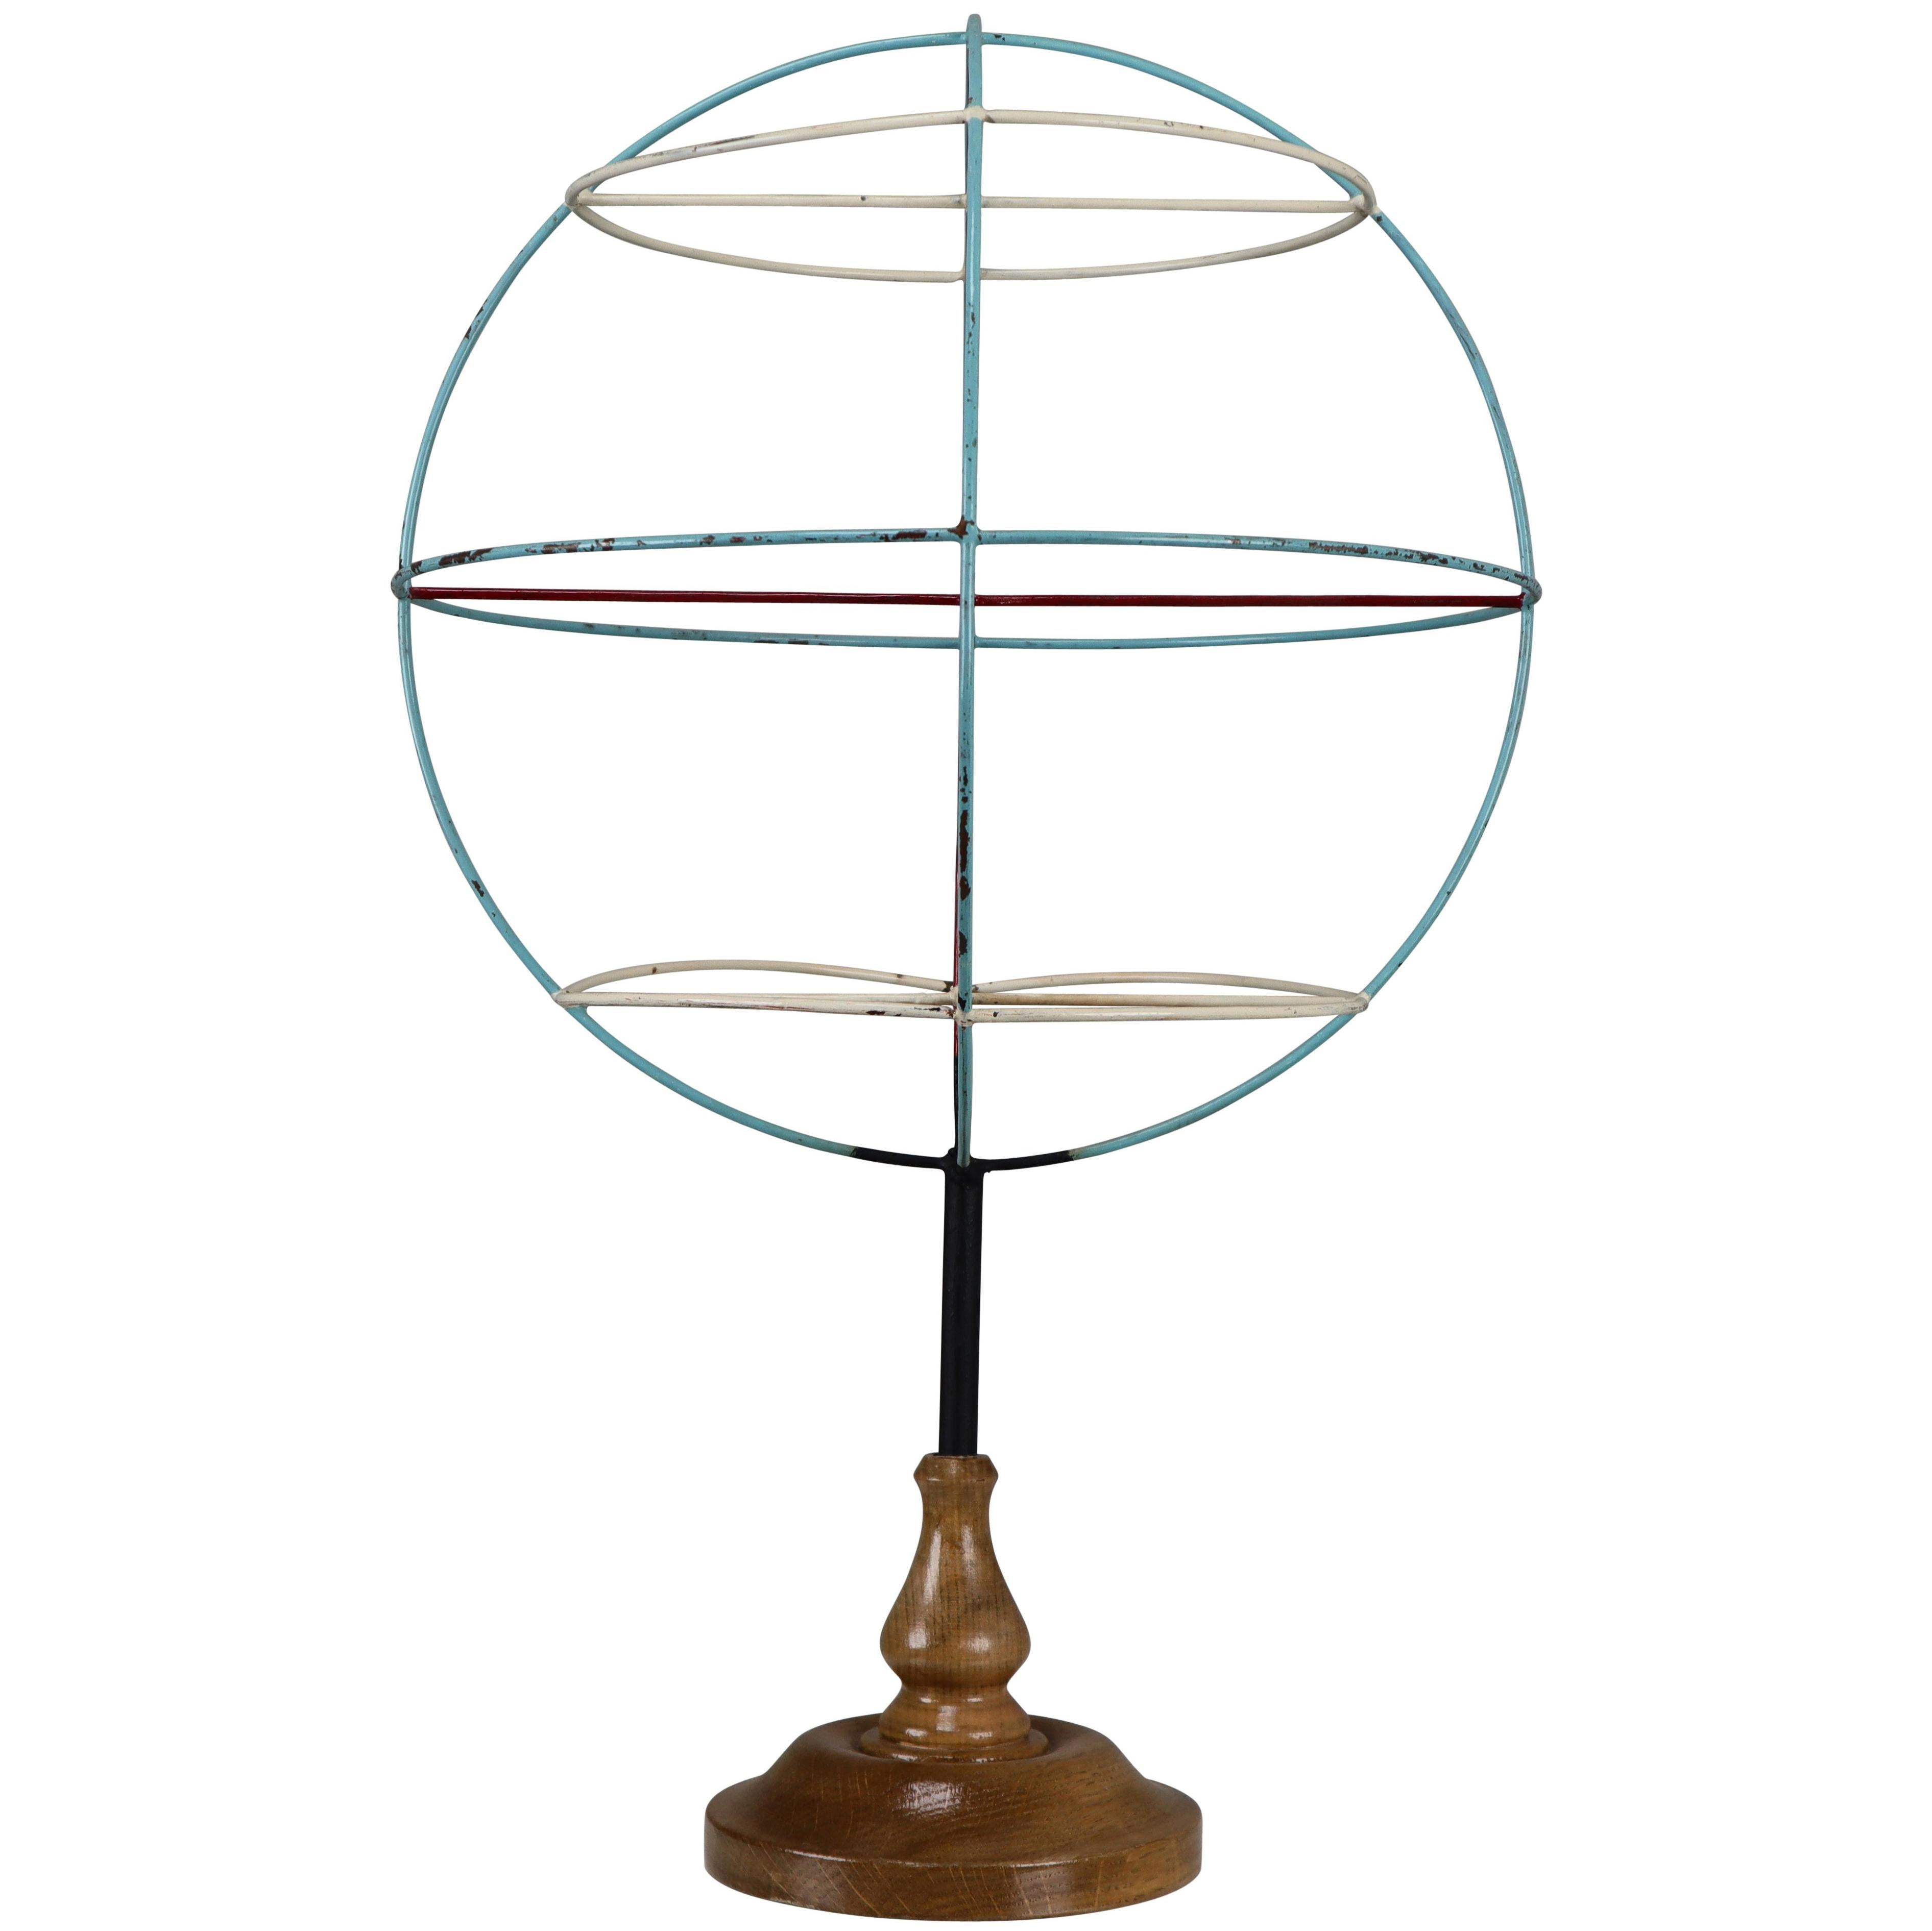 Mid-Century Decorative Globe Model from Germany from the 1950s